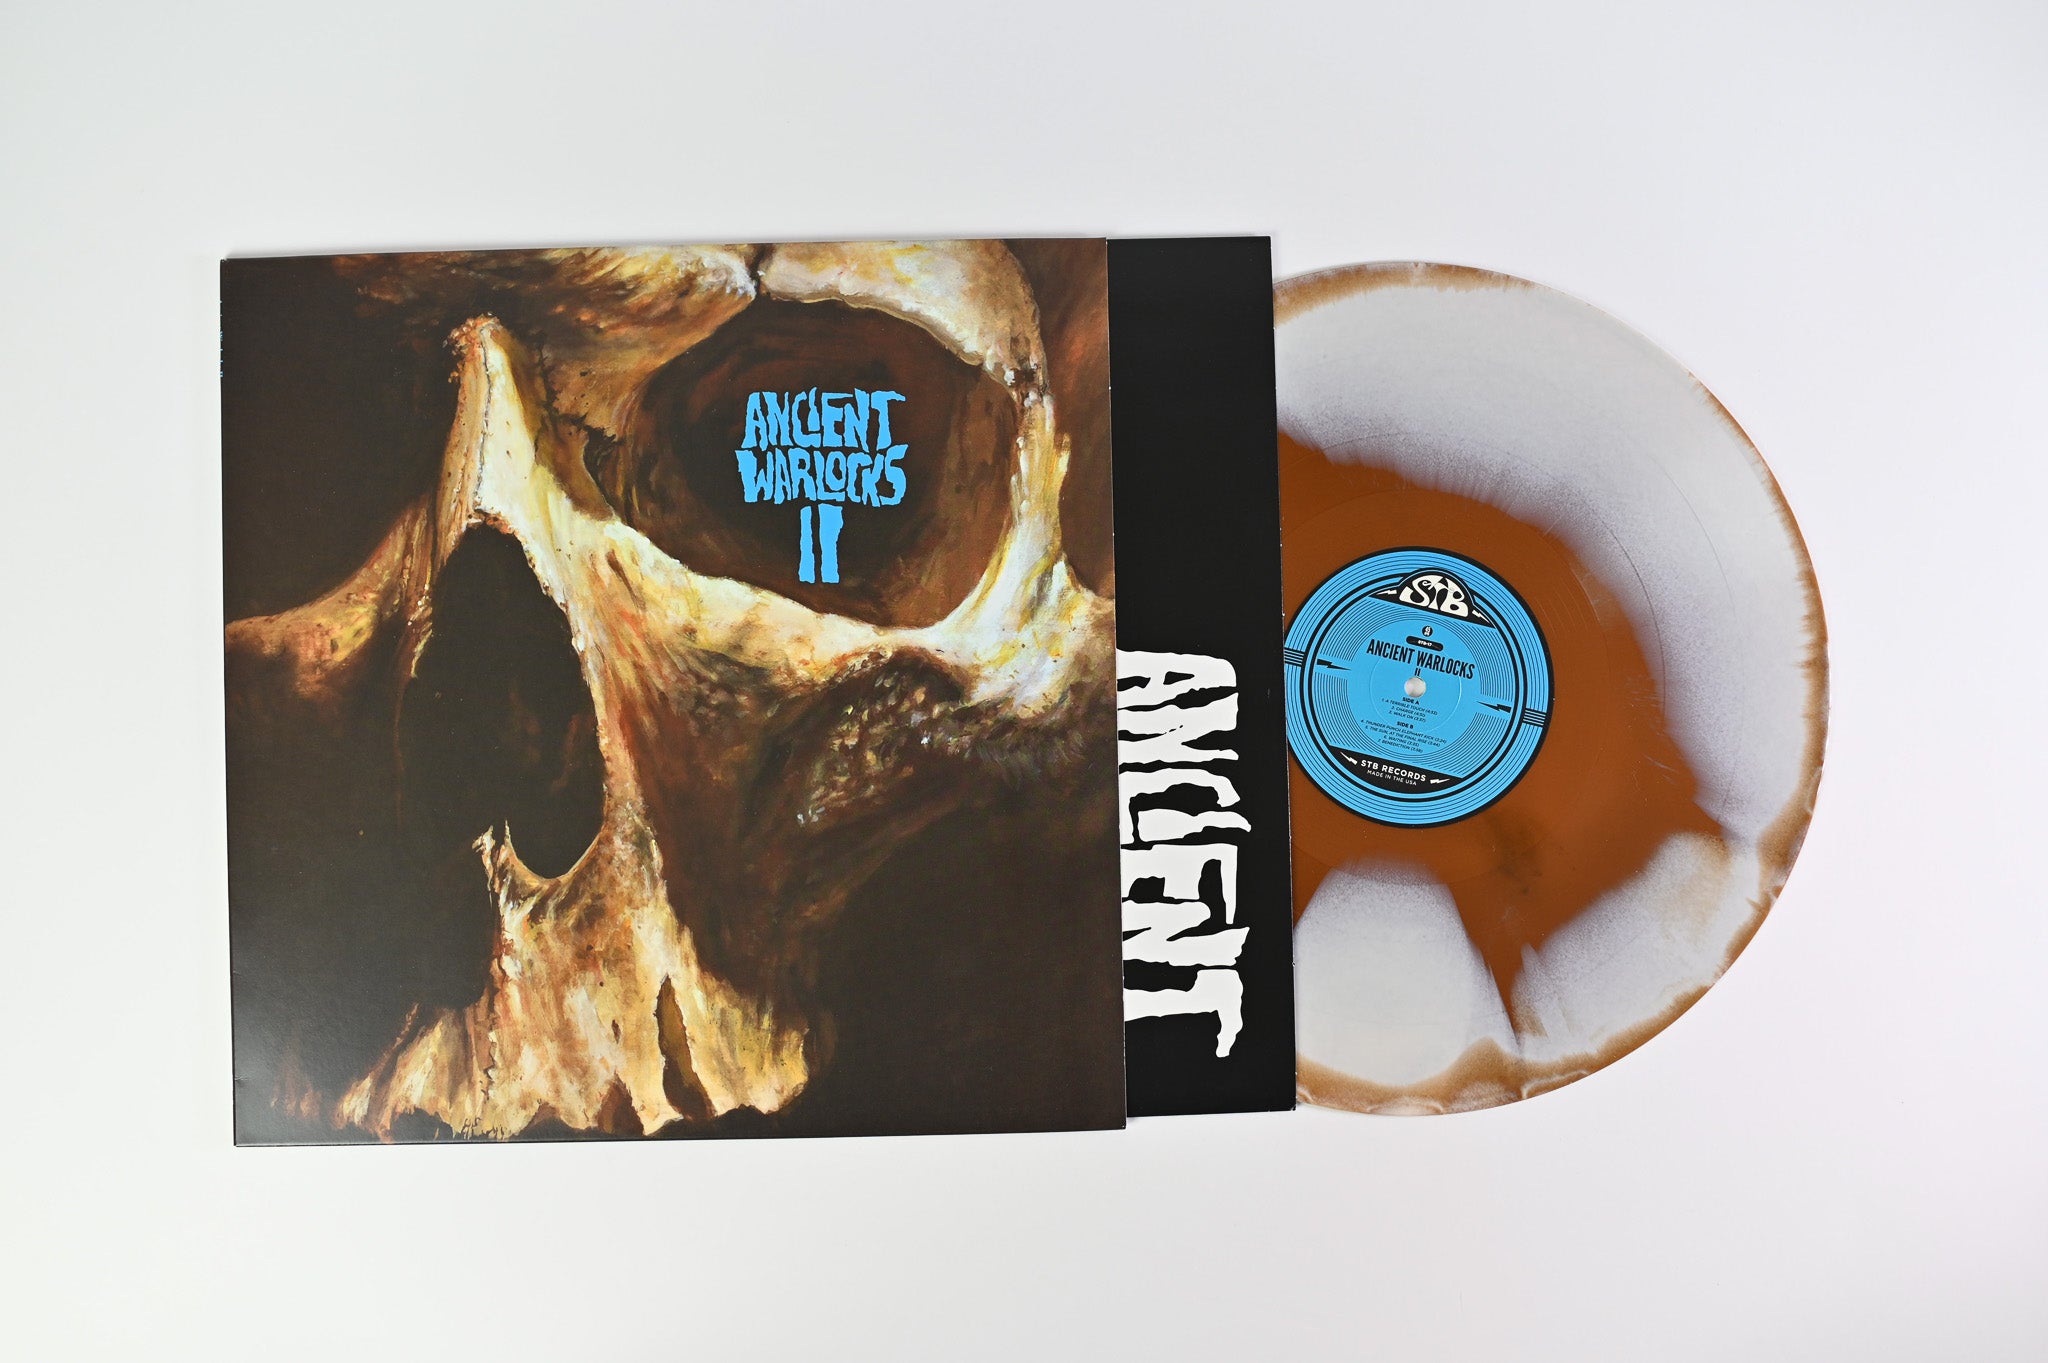 Ancient Warlocks - II on STB Ltd Gold And White Marbled Translucent